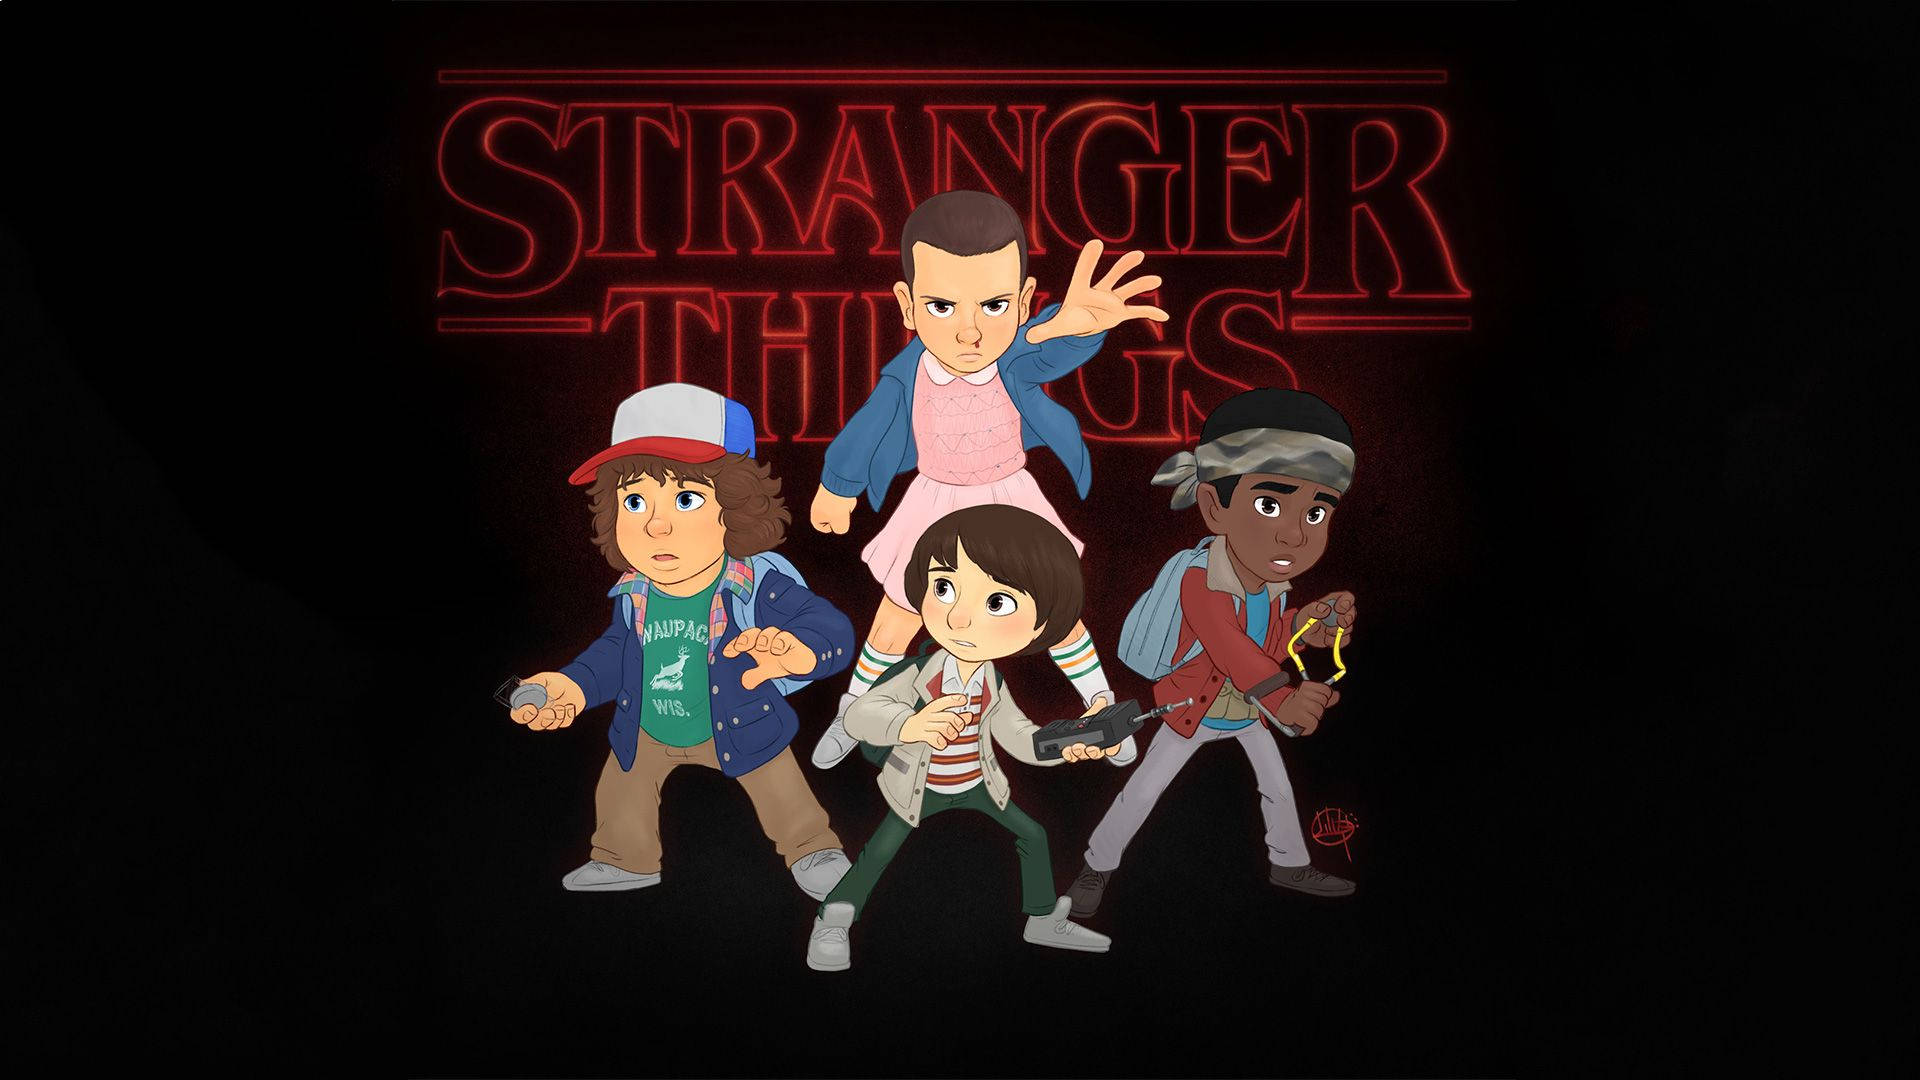 Download Cute Animated Stranger Things Characters Wallpaper 